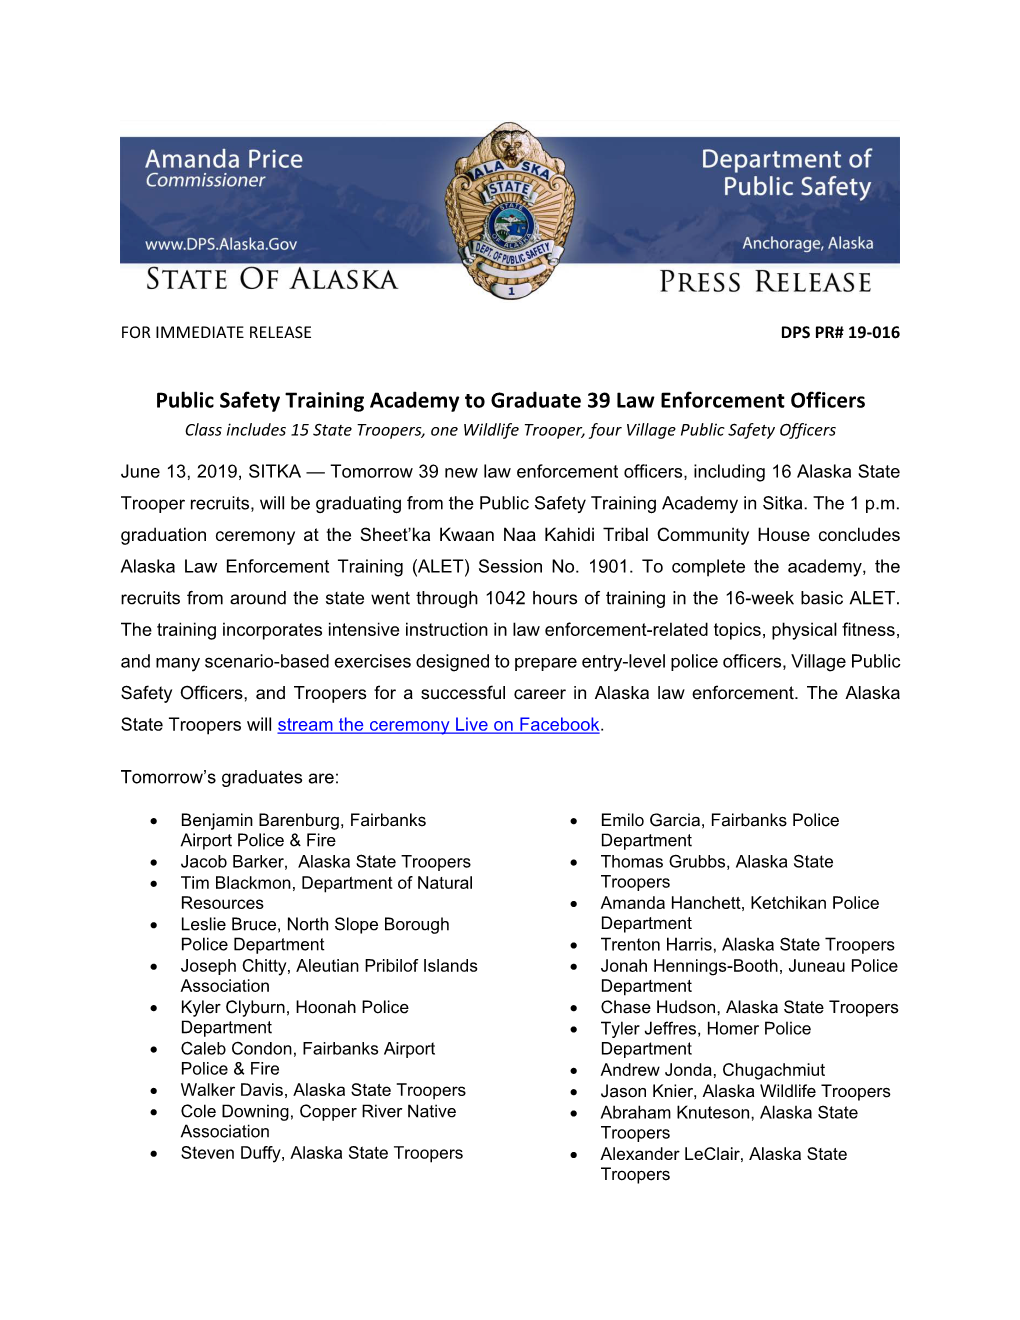 Public Safety Training Academy to Graduate 39 Law Enforcement Officers Class Includes 15 State Troopers, One Wildlife Trooper, Four Village Public Safety Officers